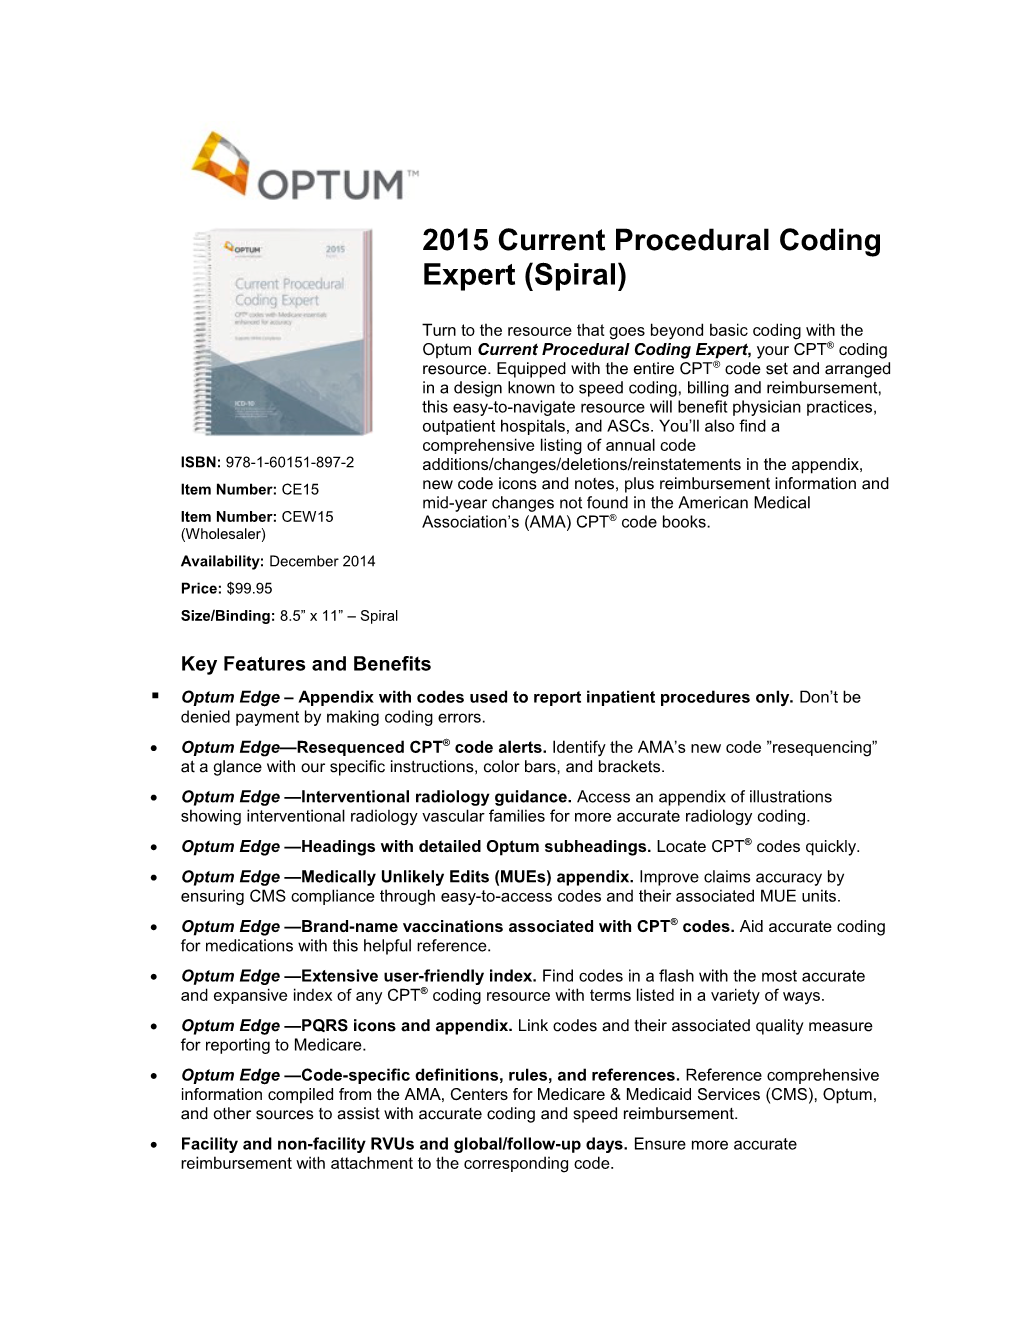 Optum Edge Headings with Detailed Optumsubheadings. Locate CPT Codes Quickly